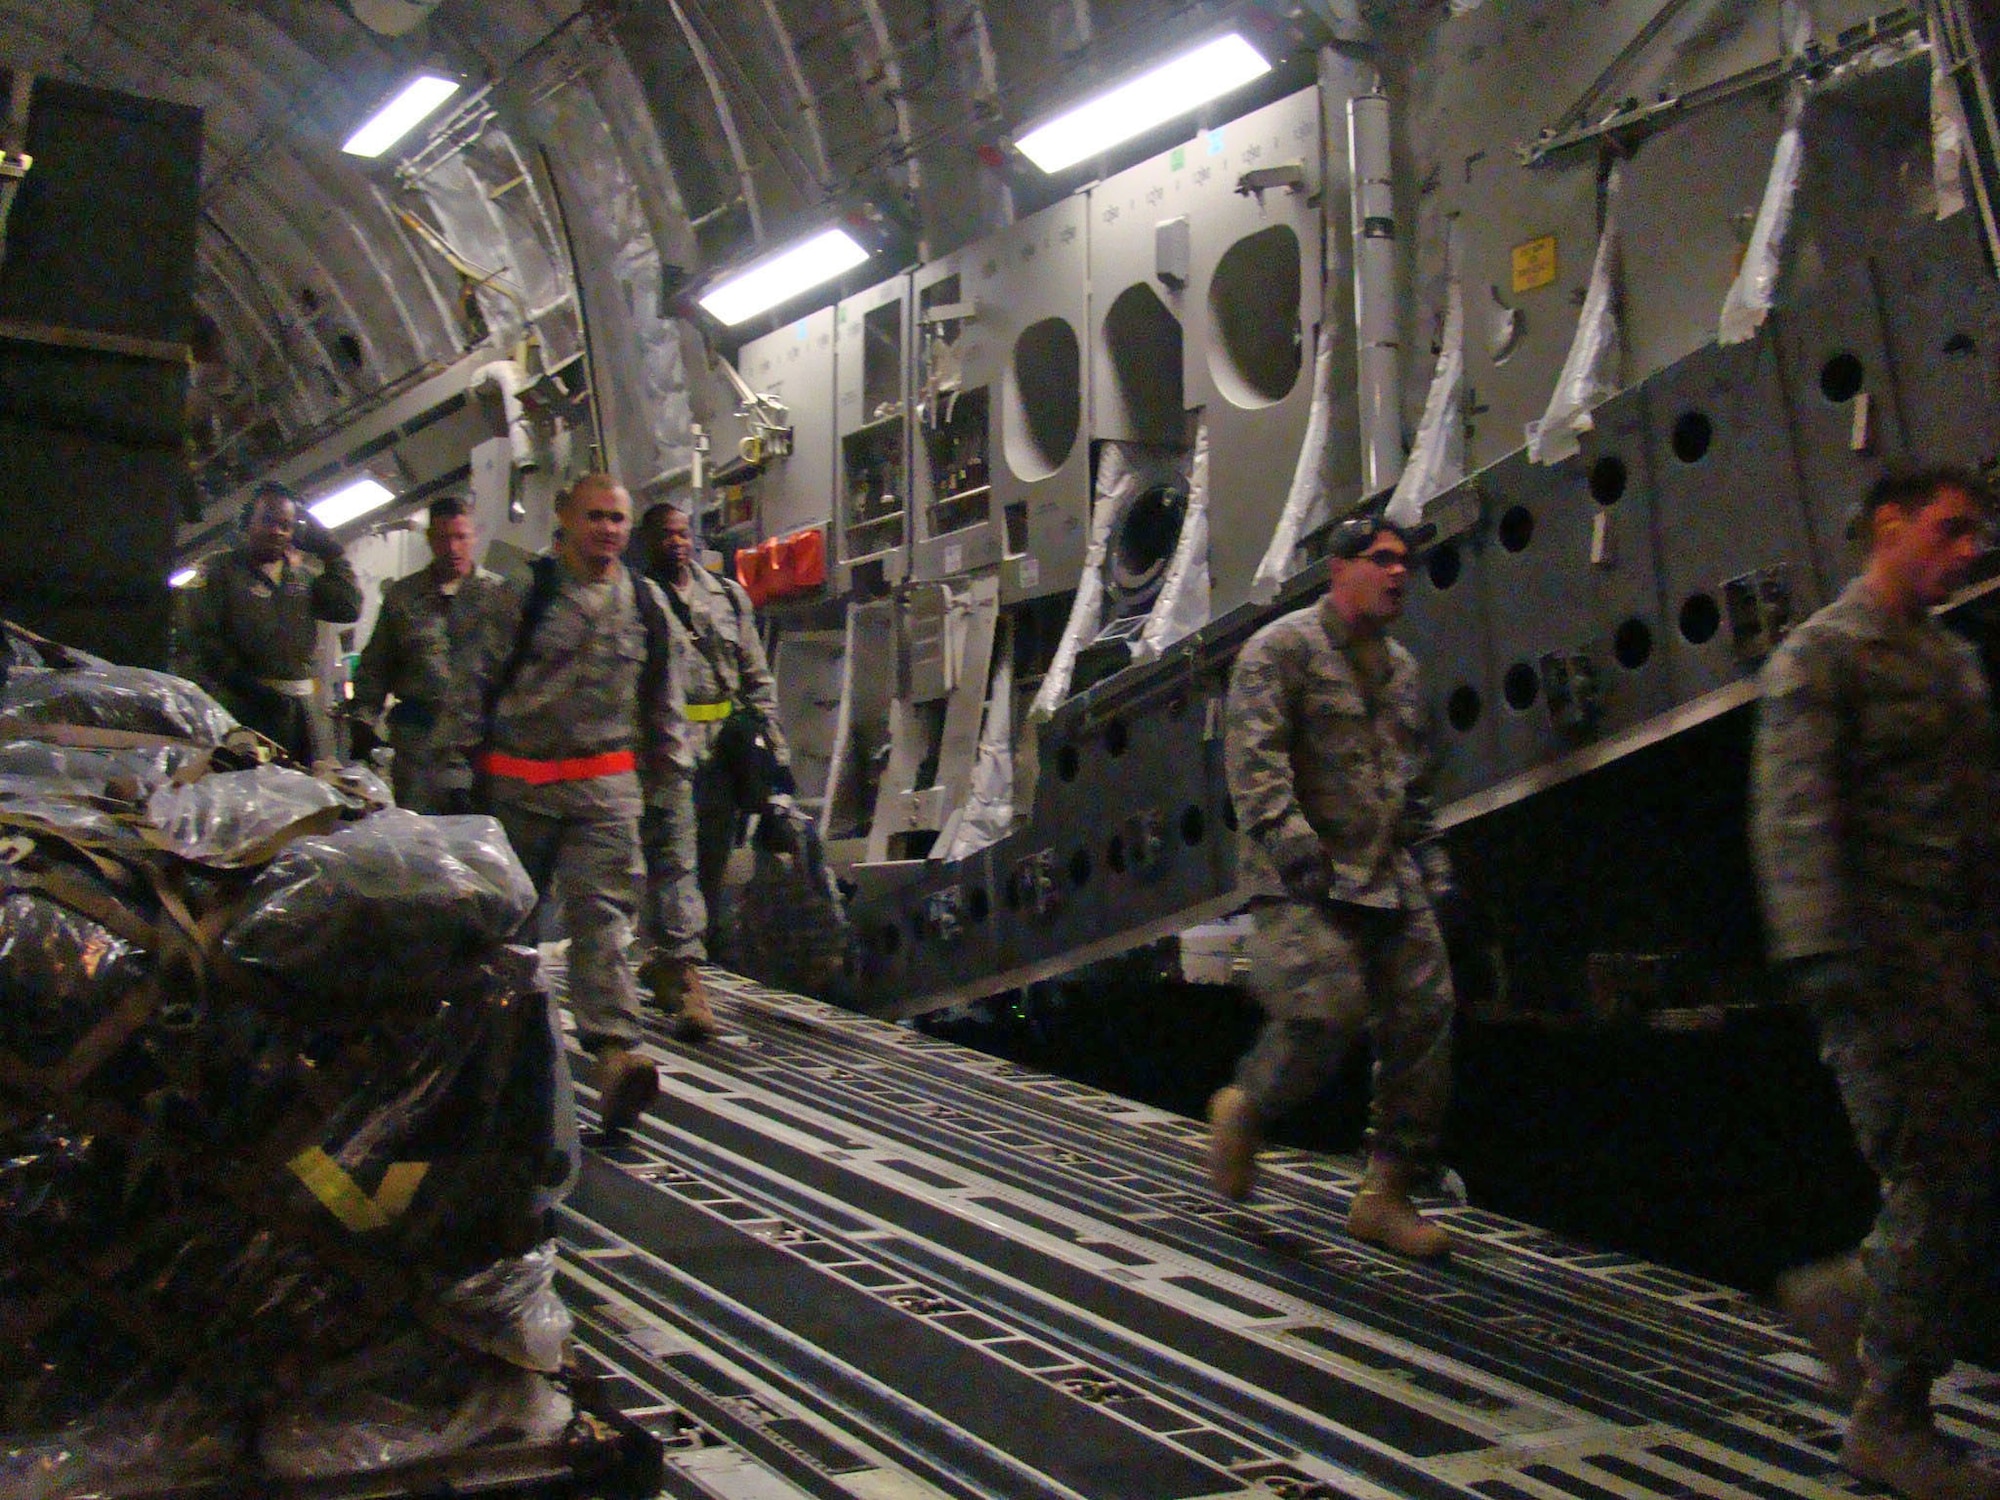 Members of the 621st Contingency Response Wing step down a C-17 Globemaster III cargo hatch Jan. 14, 2010, at the Toussaint L'Ouverture International Airport, Haiti. The 21 passengers and 44 tons of cargo were sent to Haiti on a 305th Air Mobility Wing C-17 from Joint Base McGuire-Dix-Lakehurst, N.J., to support relief operations in response to a devastating earthquake in the area. (U.S. Air Force photo/Tech. Sgt. Denise Johnson)
